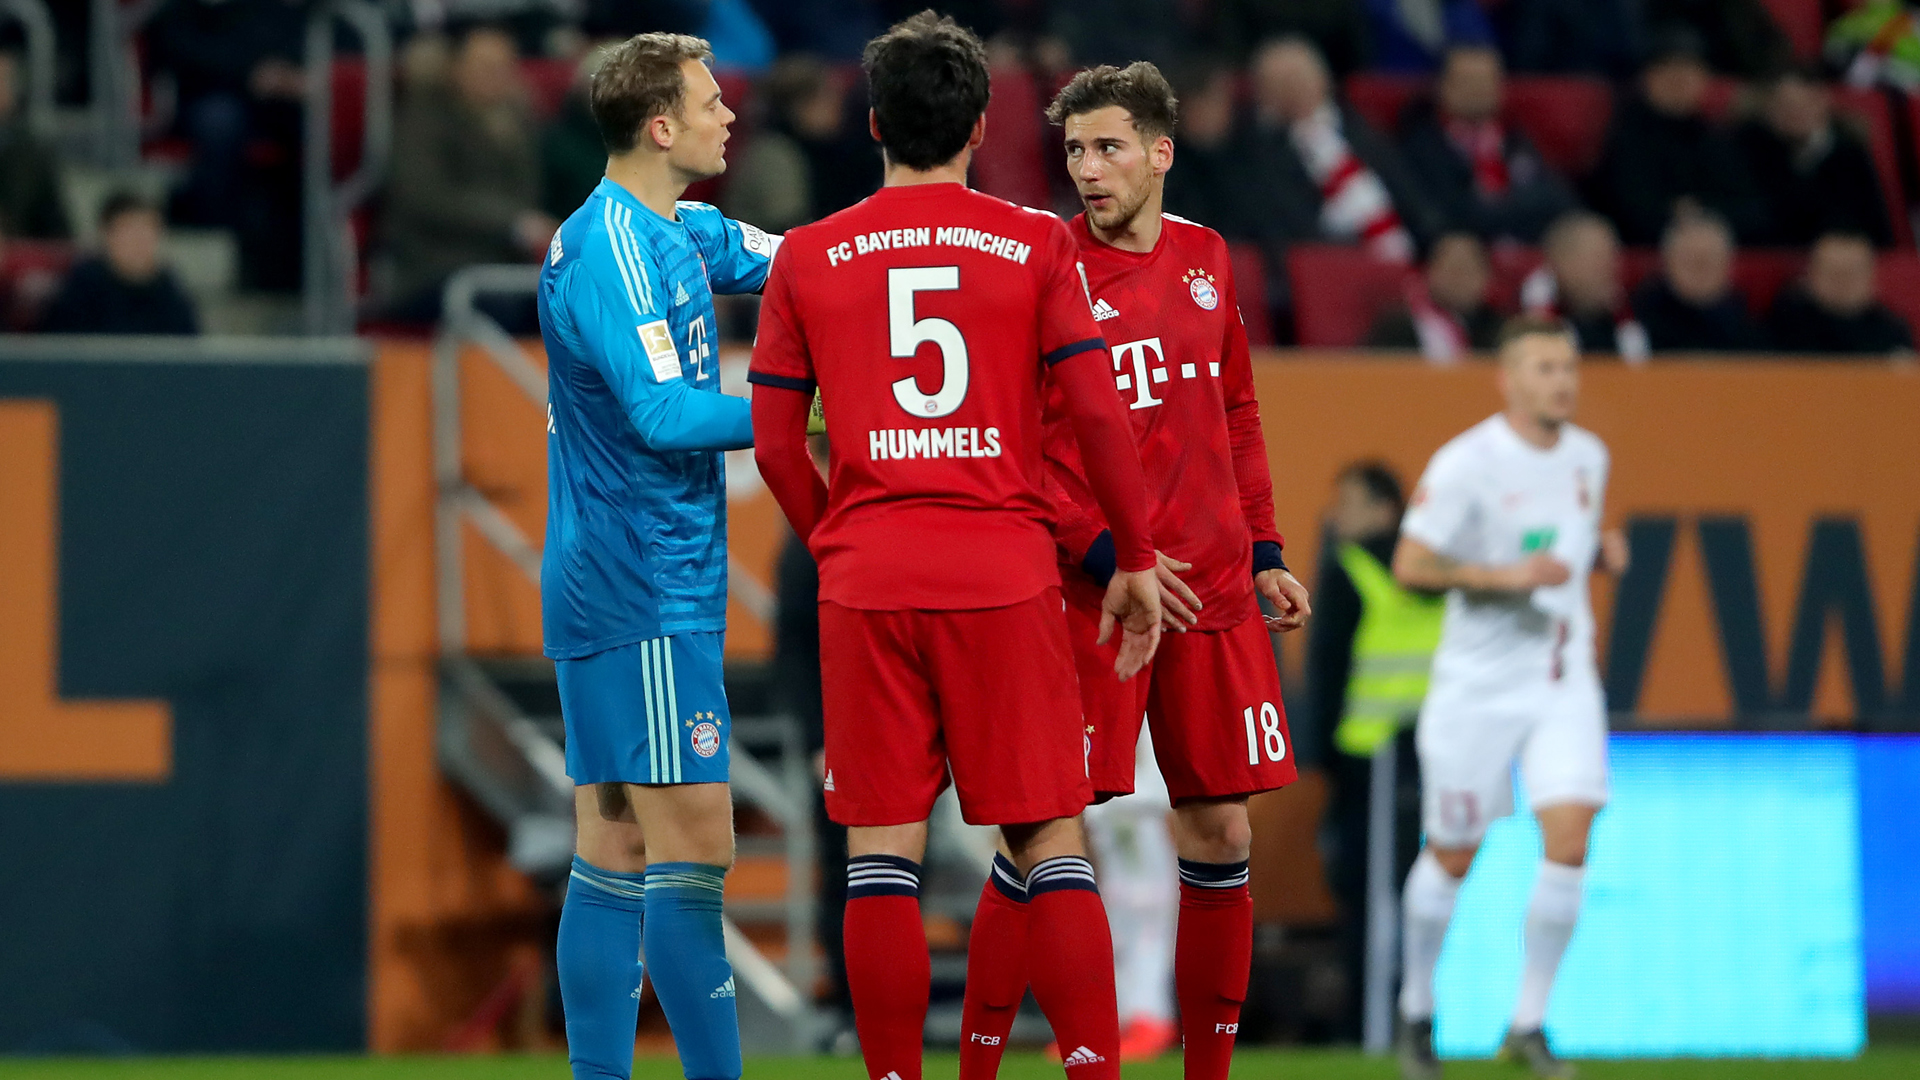 Bayern Munich cannot afford defensive mistakes against Liverpool, coach Niko Kovac warned.